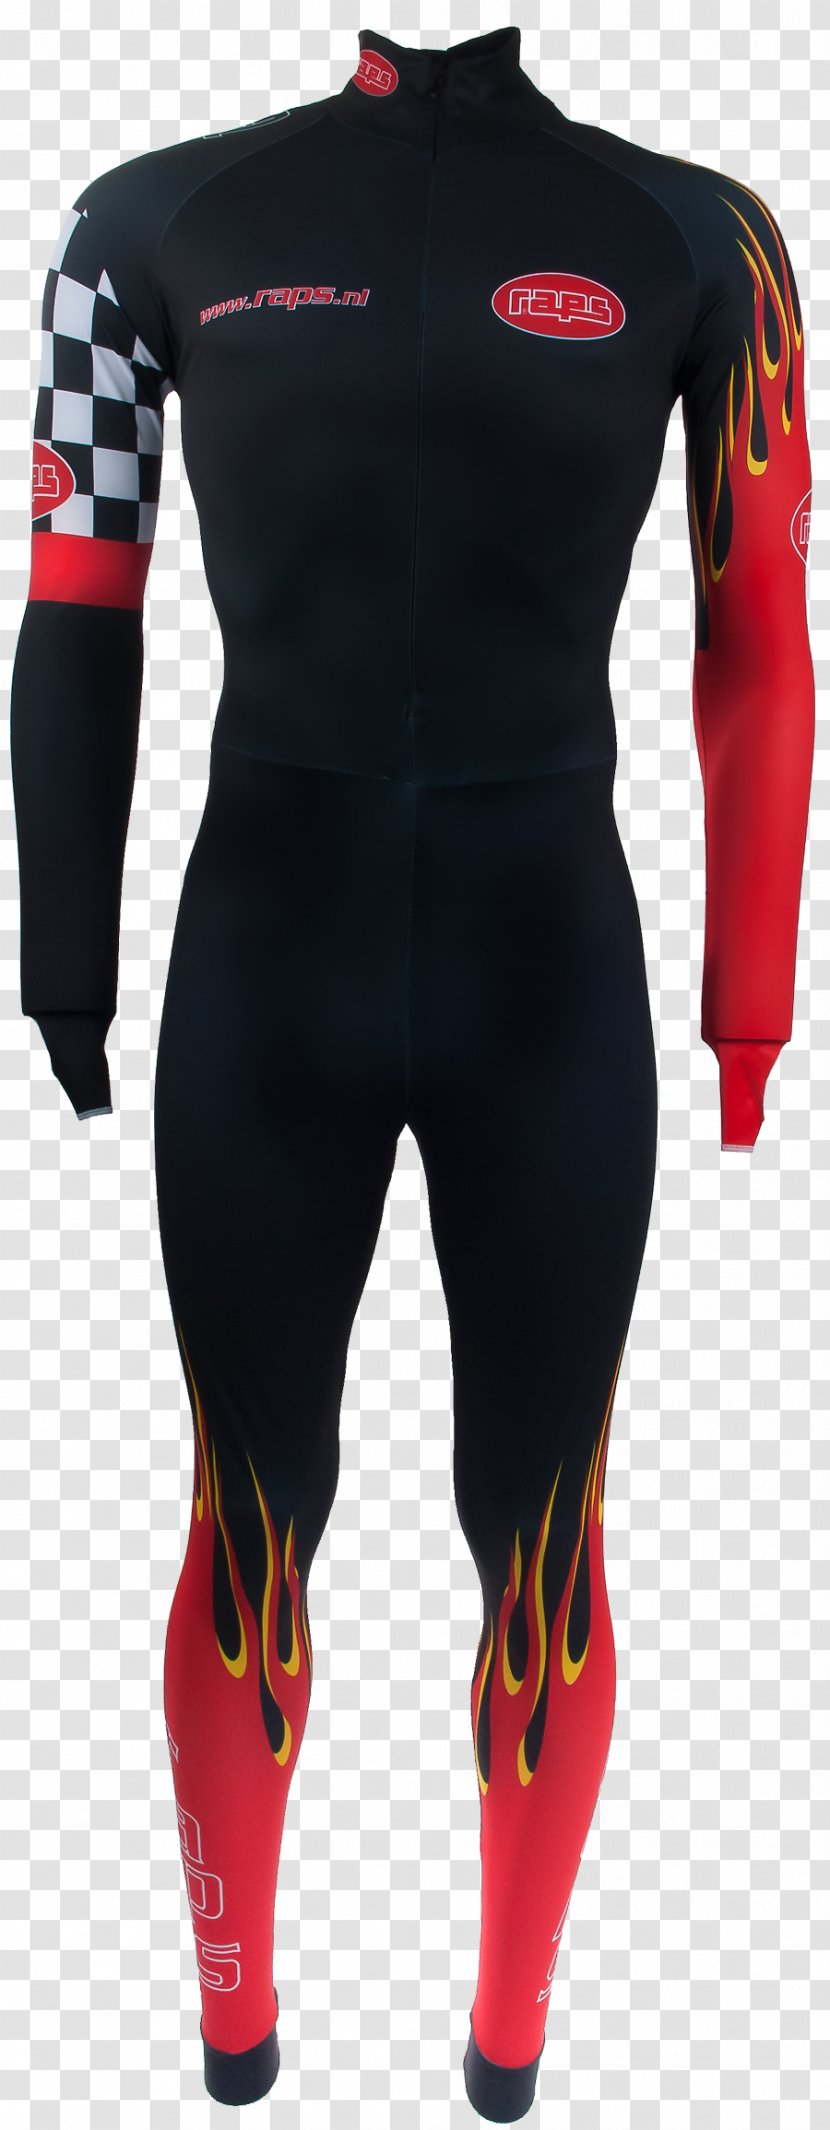 Wetsuit - Personal Protective Equipment - Ice Skating Transparent PNG